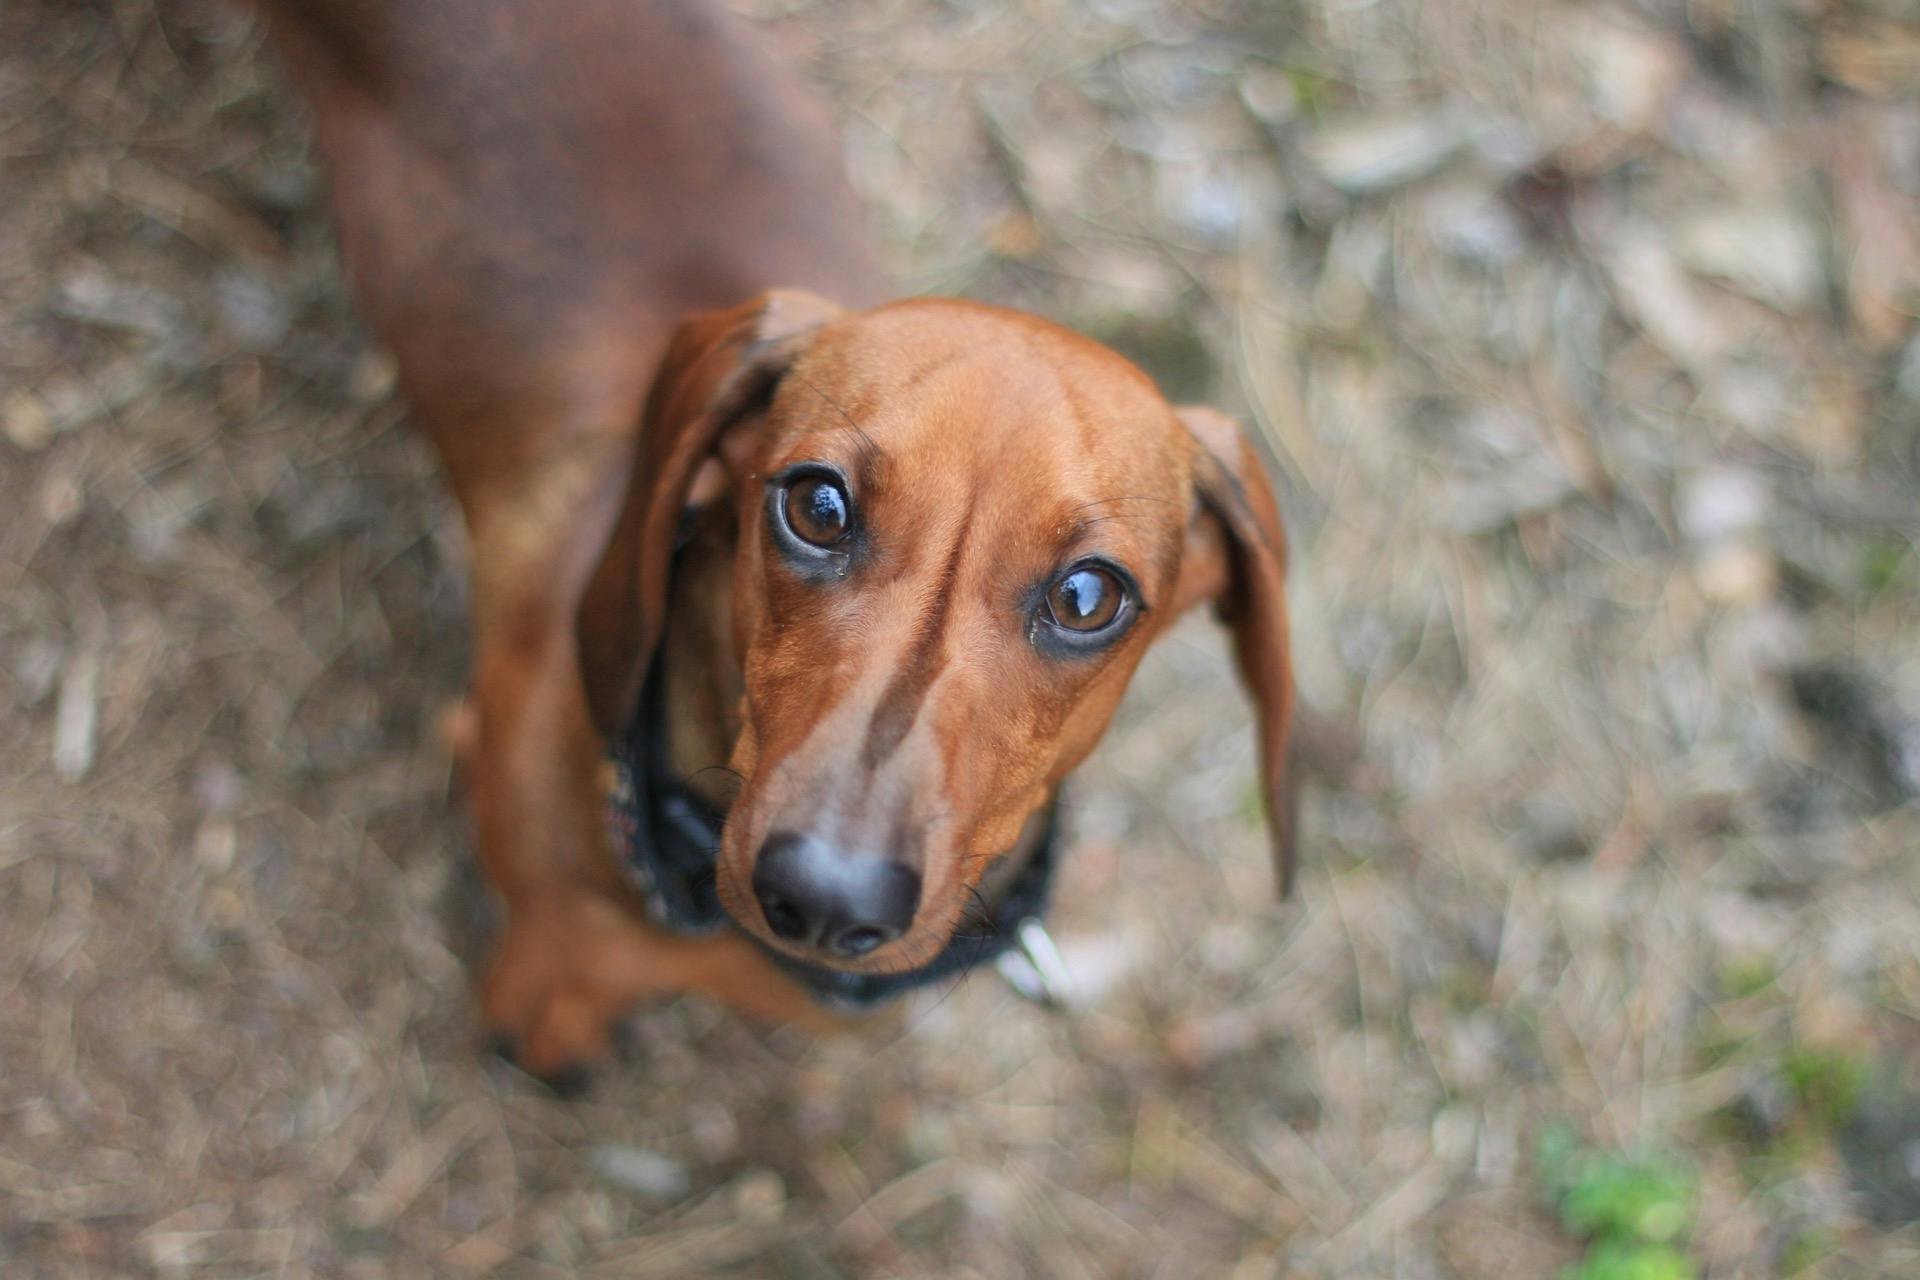 Cute dachshund looking directly into the camera